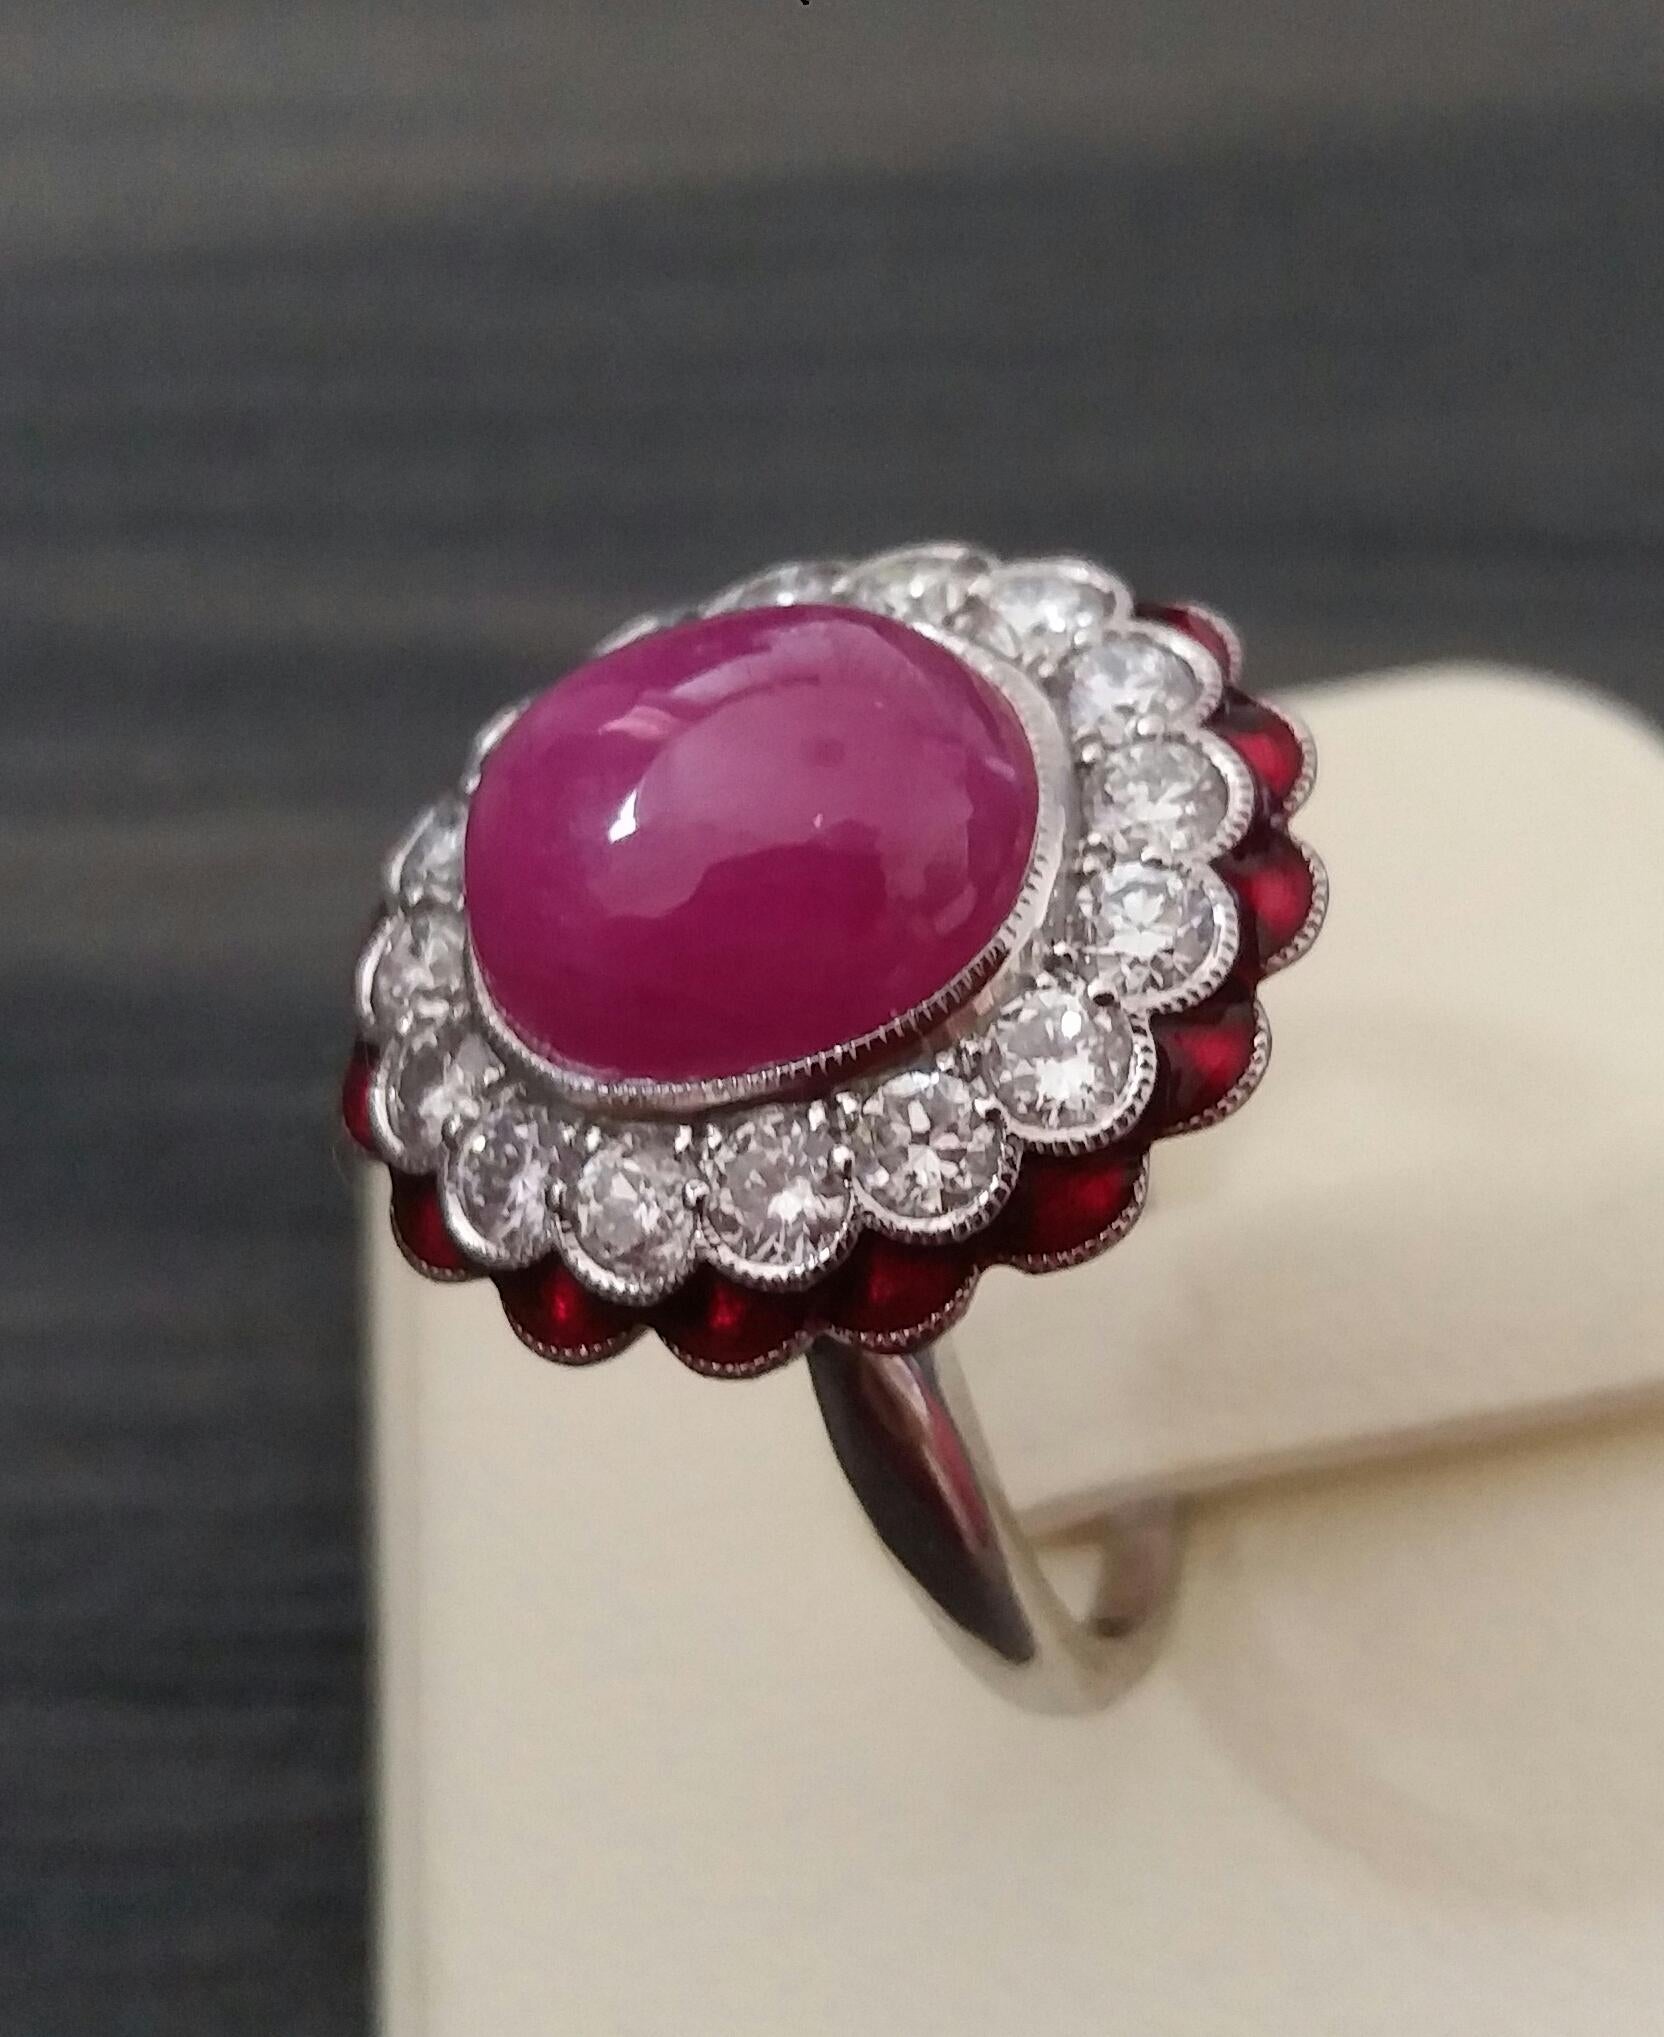 10 Carat Oval Ruby Cab 1 Carat Diamonds Red Enamel 14K White Gold Cocktail Ring For Sale 1